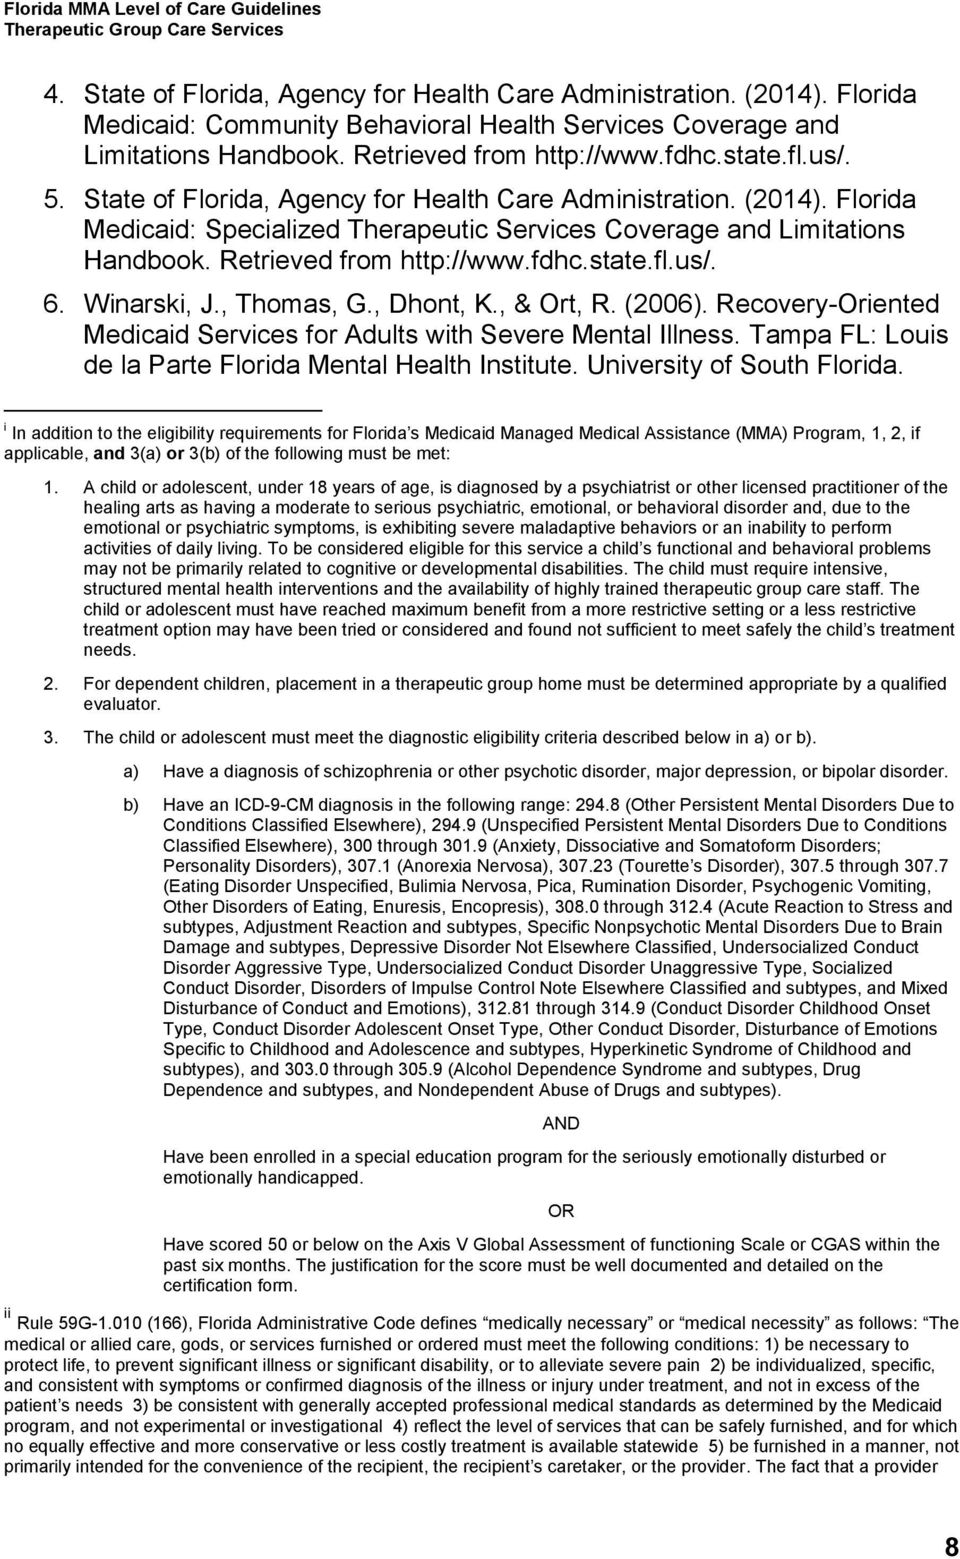 us/. 6. Winarski, J., Thomas, G., Dhont, K., & Ort, R. (2006). Recovery-Oriented Medicaid Services for Adults with Severe Mental Illness. Tampa FL: Louis de la Parte Florida Mental Health Institute.